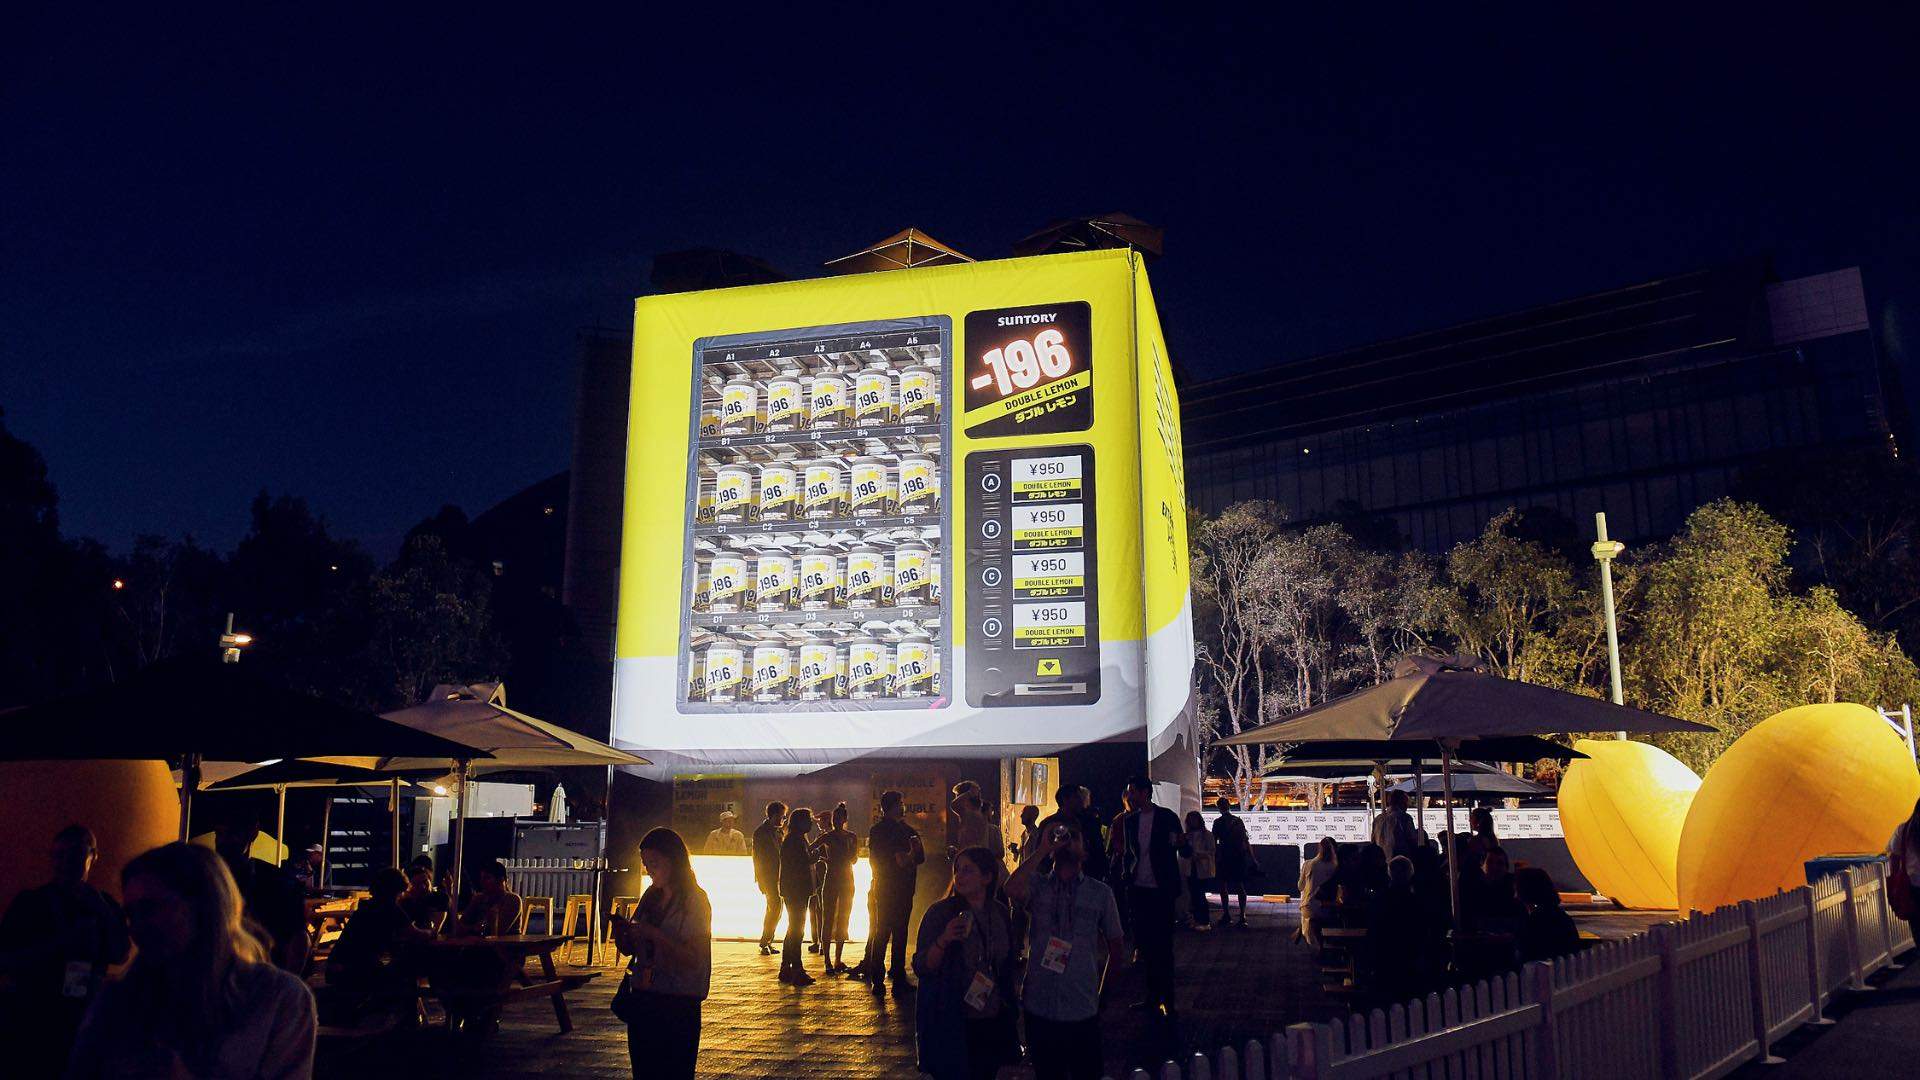 The Extreme Vending Machine lit up at night.